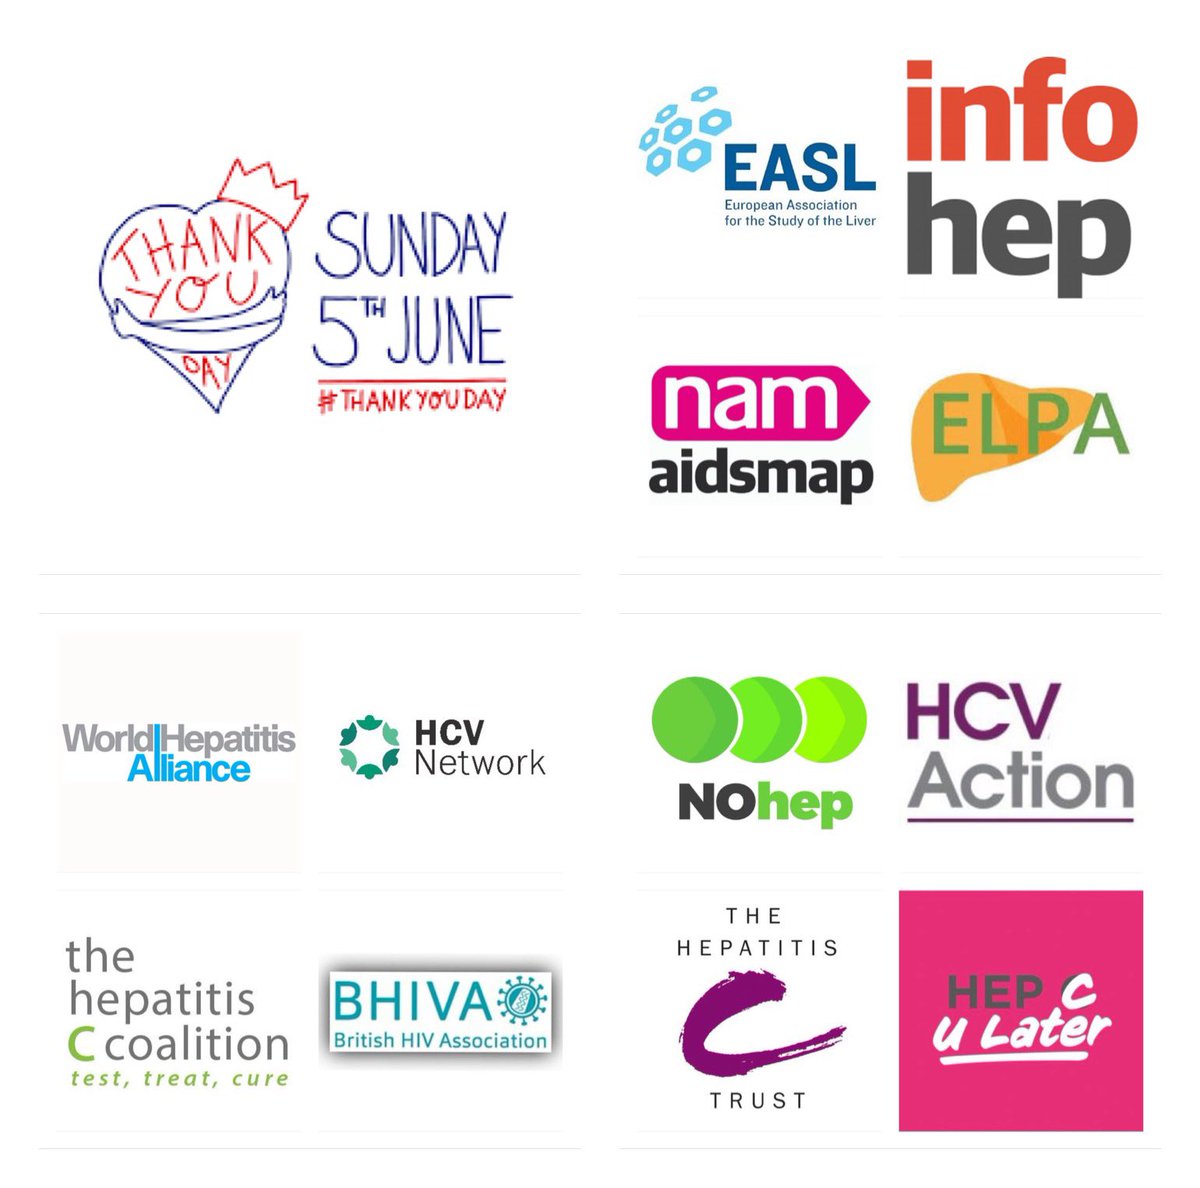 #ThankYouDay to all the #Hepatitis C  #charities, #clinicians, #policymakers & #volunteers for the fantastic work you do to ensure we eliminate #hepC by 2025
#HepCULater #LeaveNobodyBehind #TestTreatPrevent #HCV